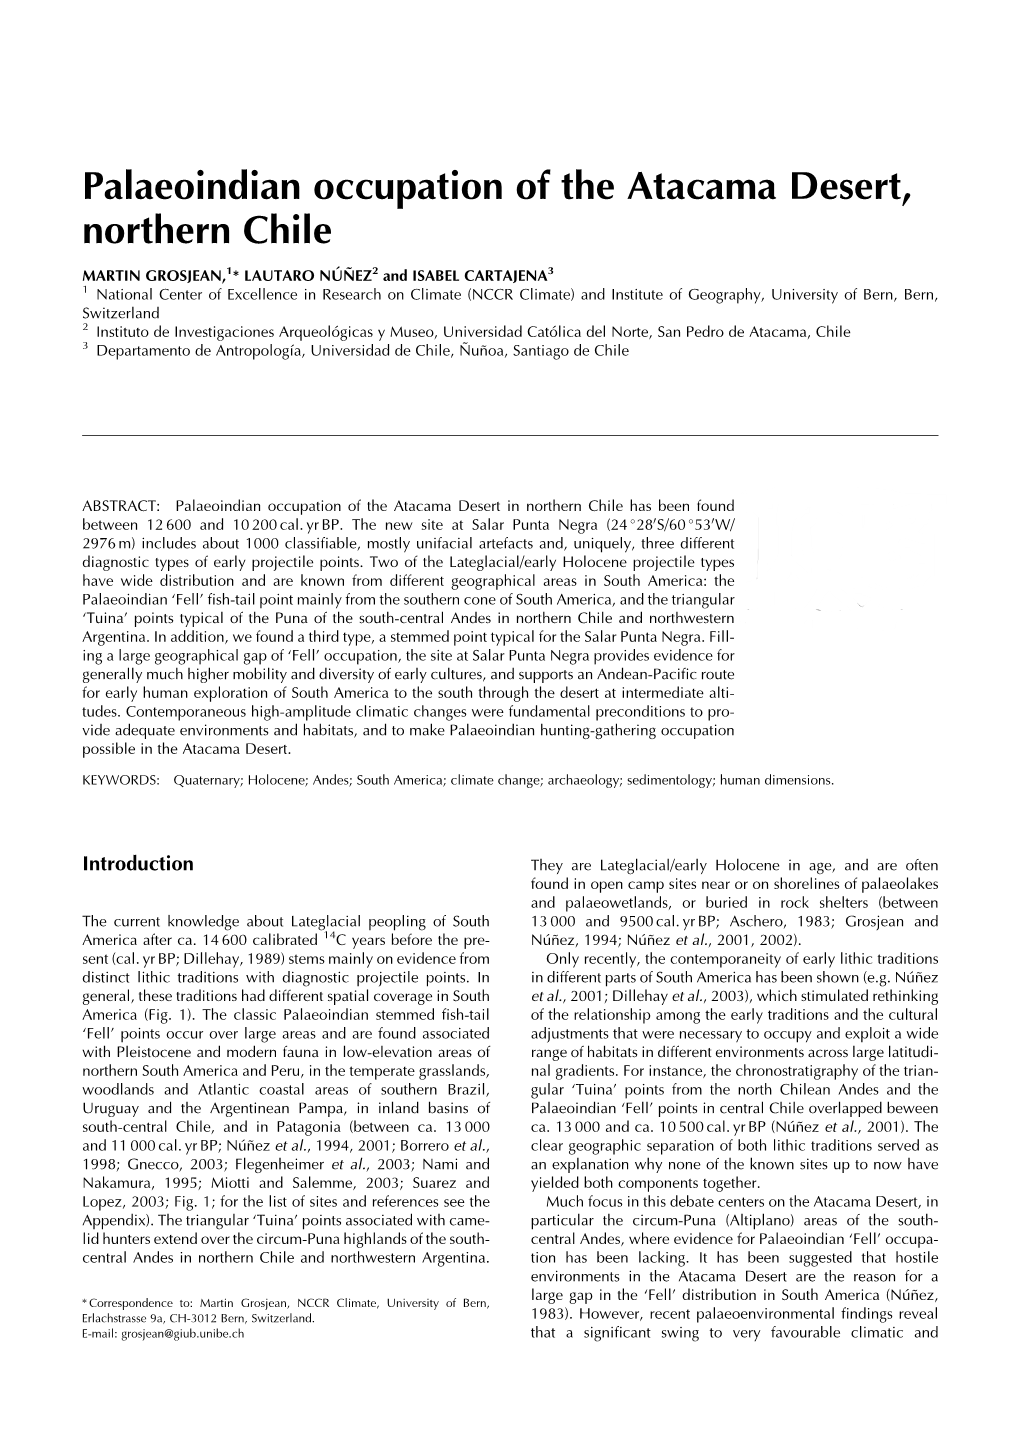 Palaeoindian Occupation of the Atacama Desert, Northern Chile